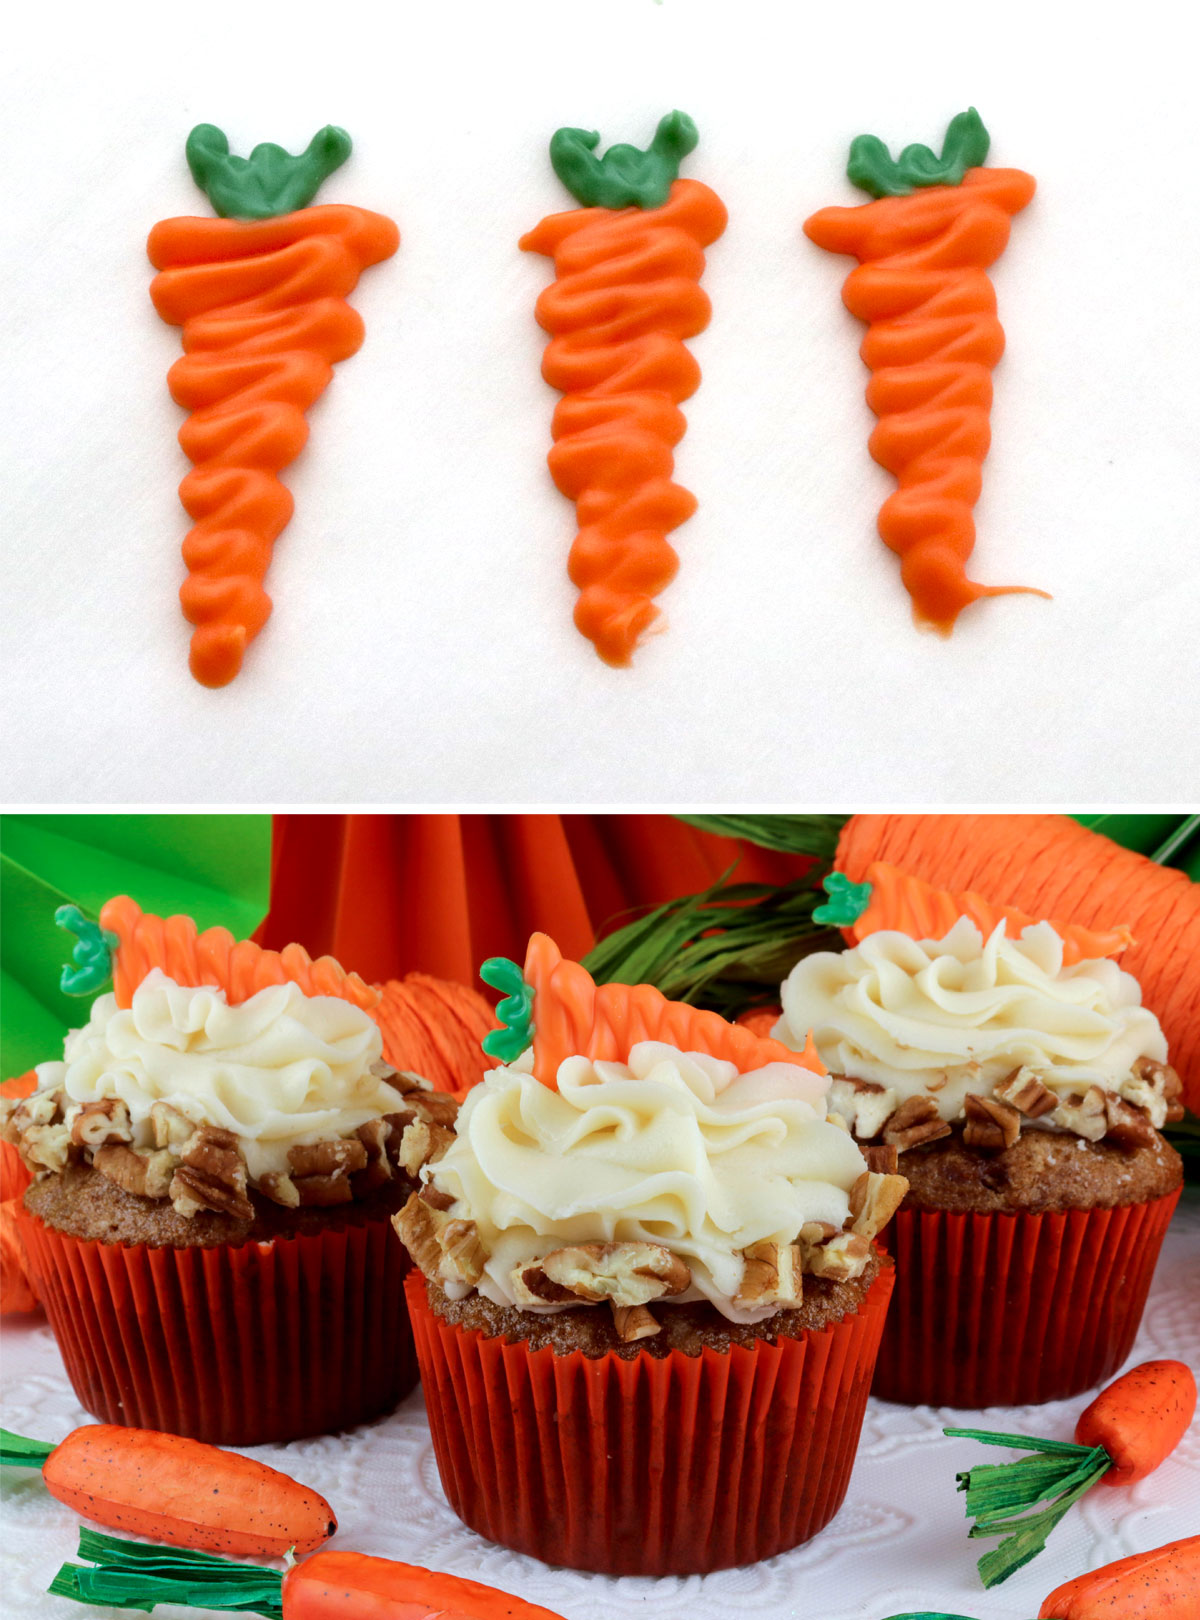 Collage image showing a second way to decorate the cupcakes by adding a edible carrot decoration made from candy melts.